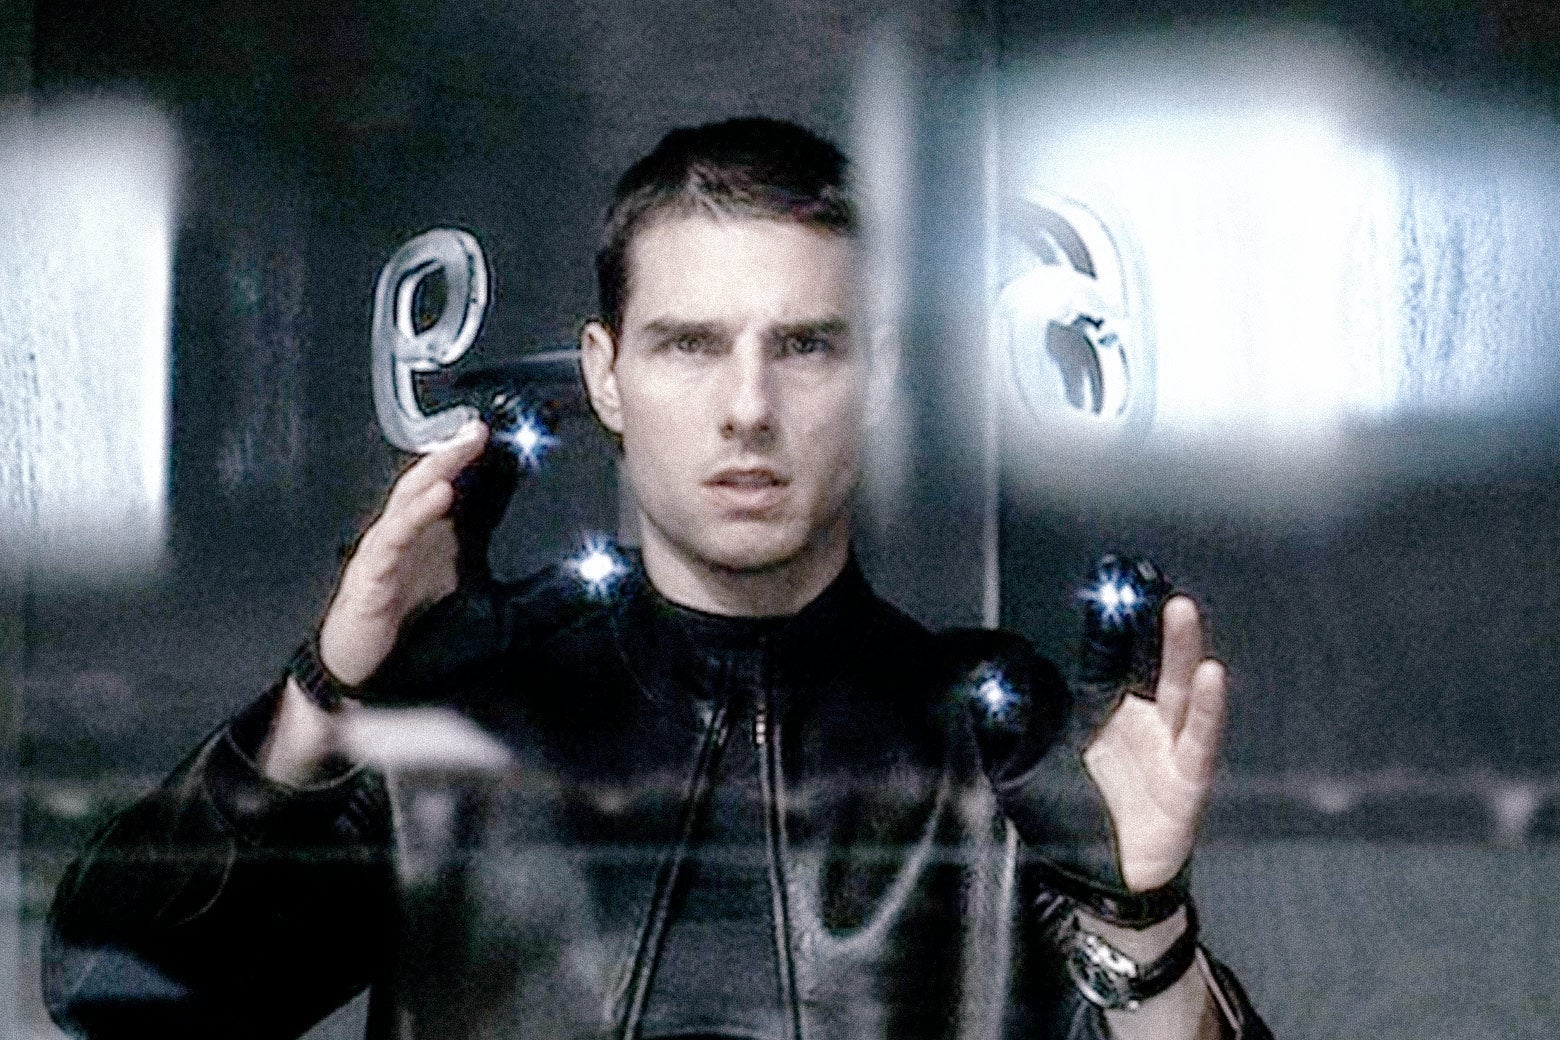 Tom Cruise wears gloves with light-emitting diodes.